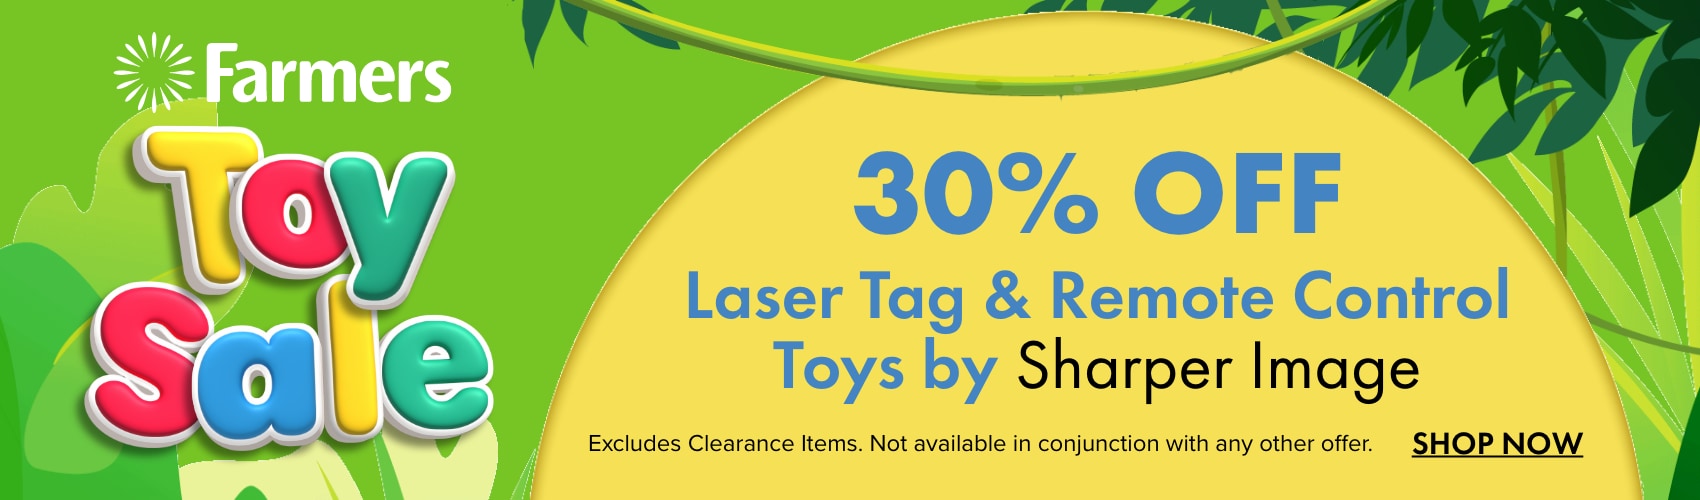 30% OFF Laser Tag & Remote Control Toys by Sharper Image